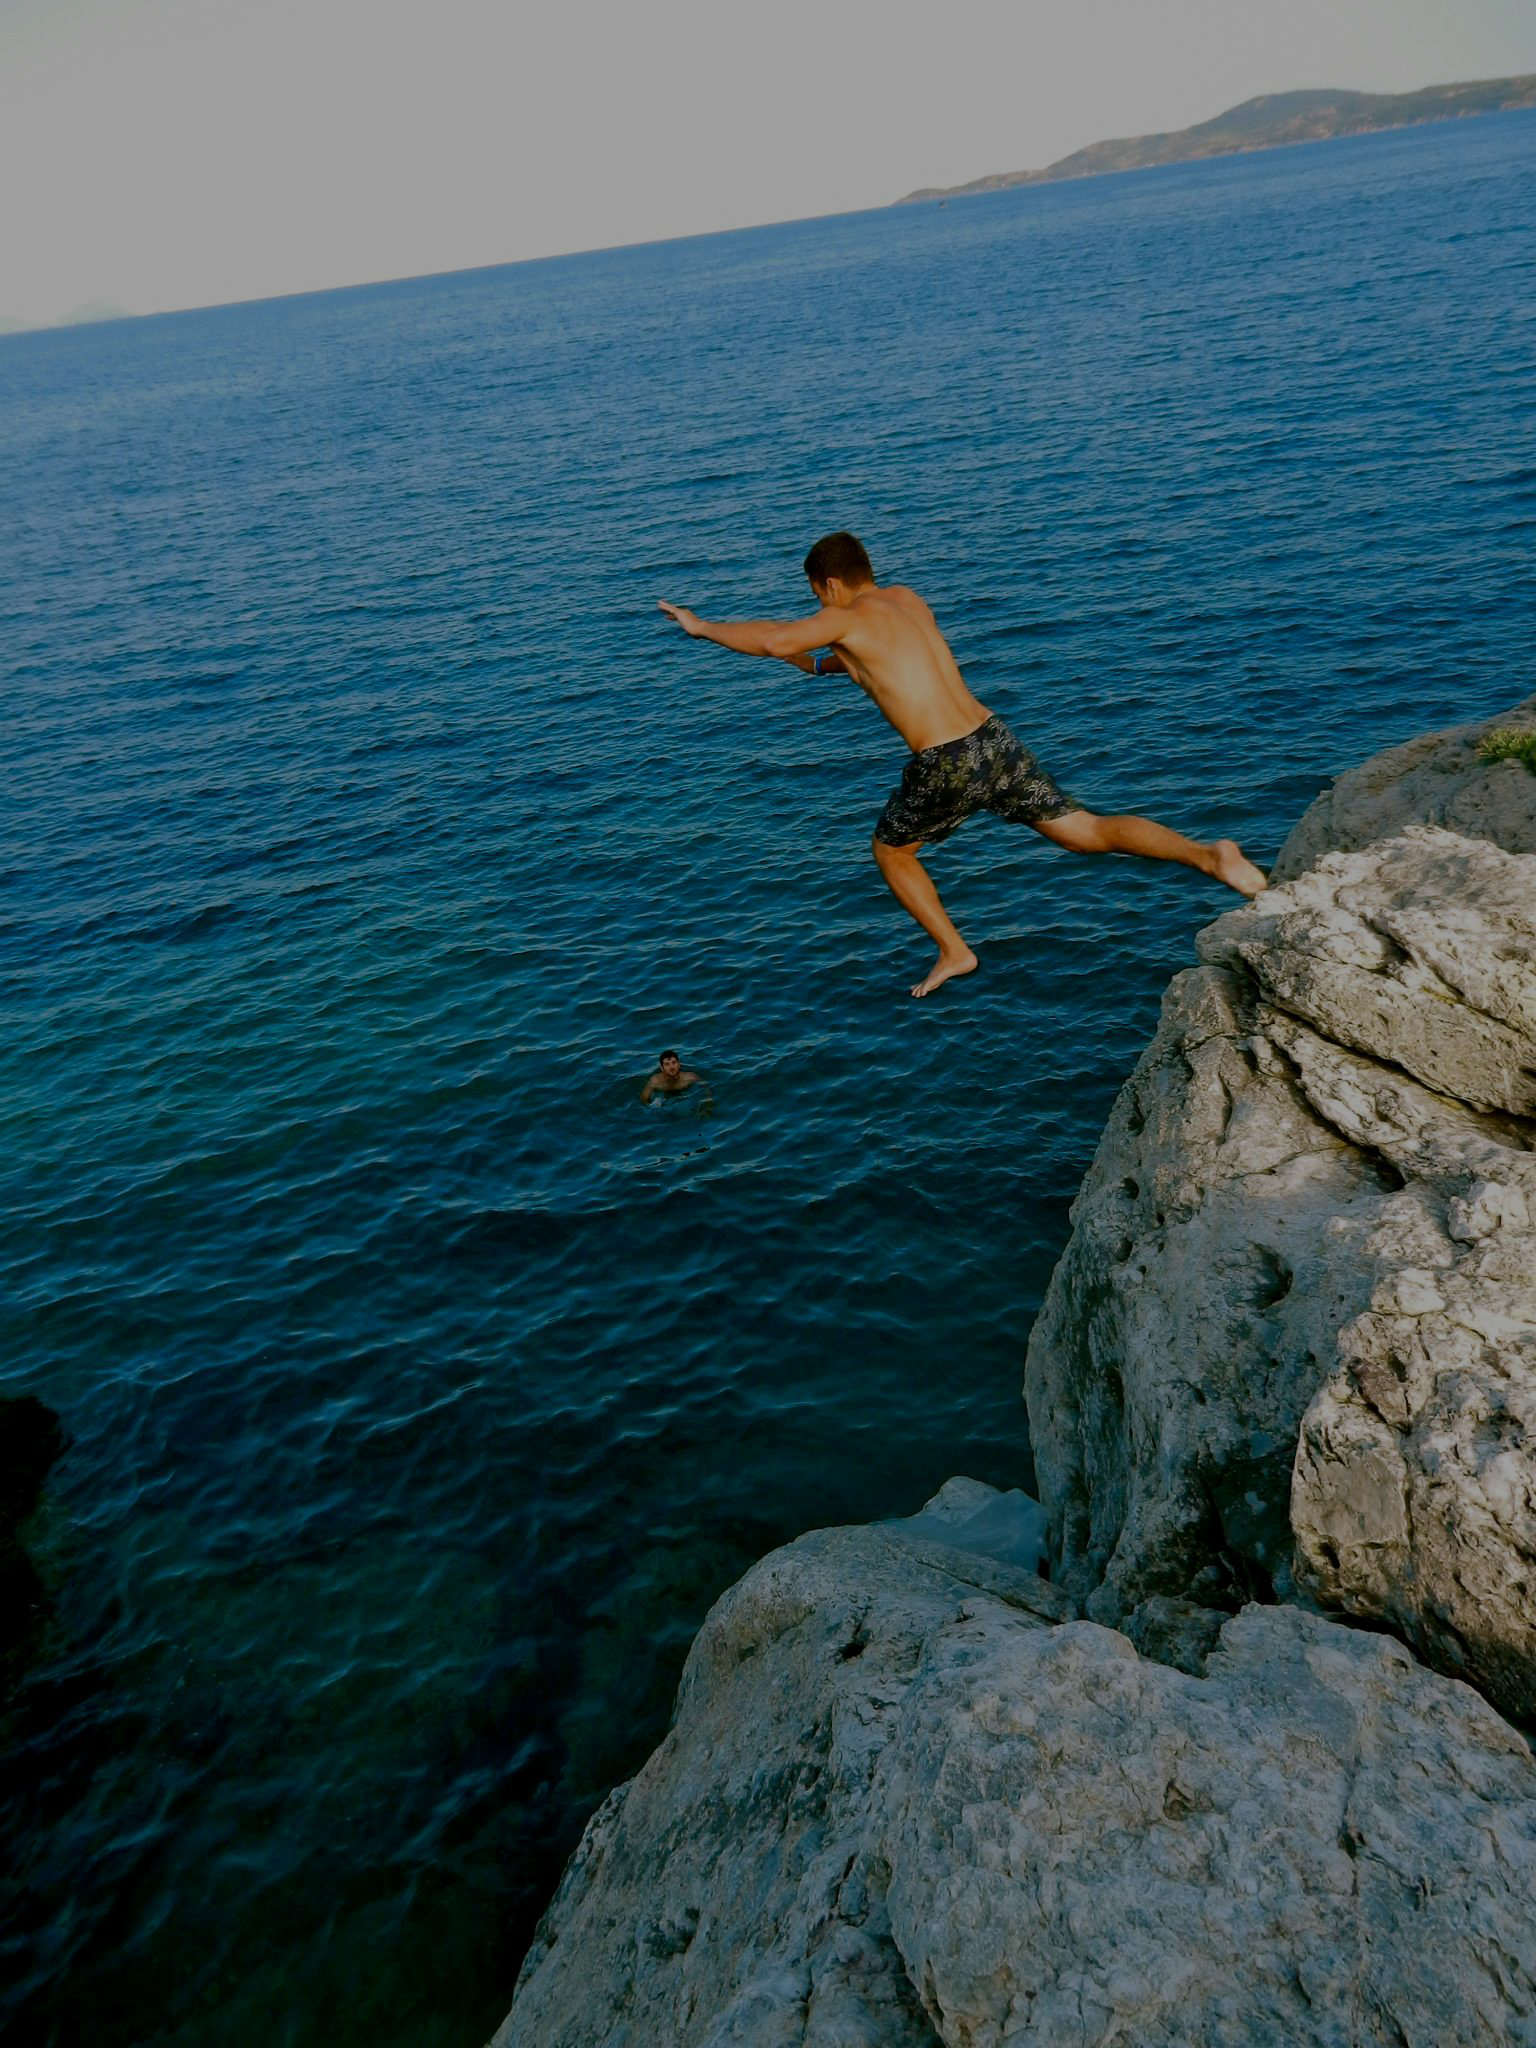 Elad Schor Jumping off a cliff in Greece